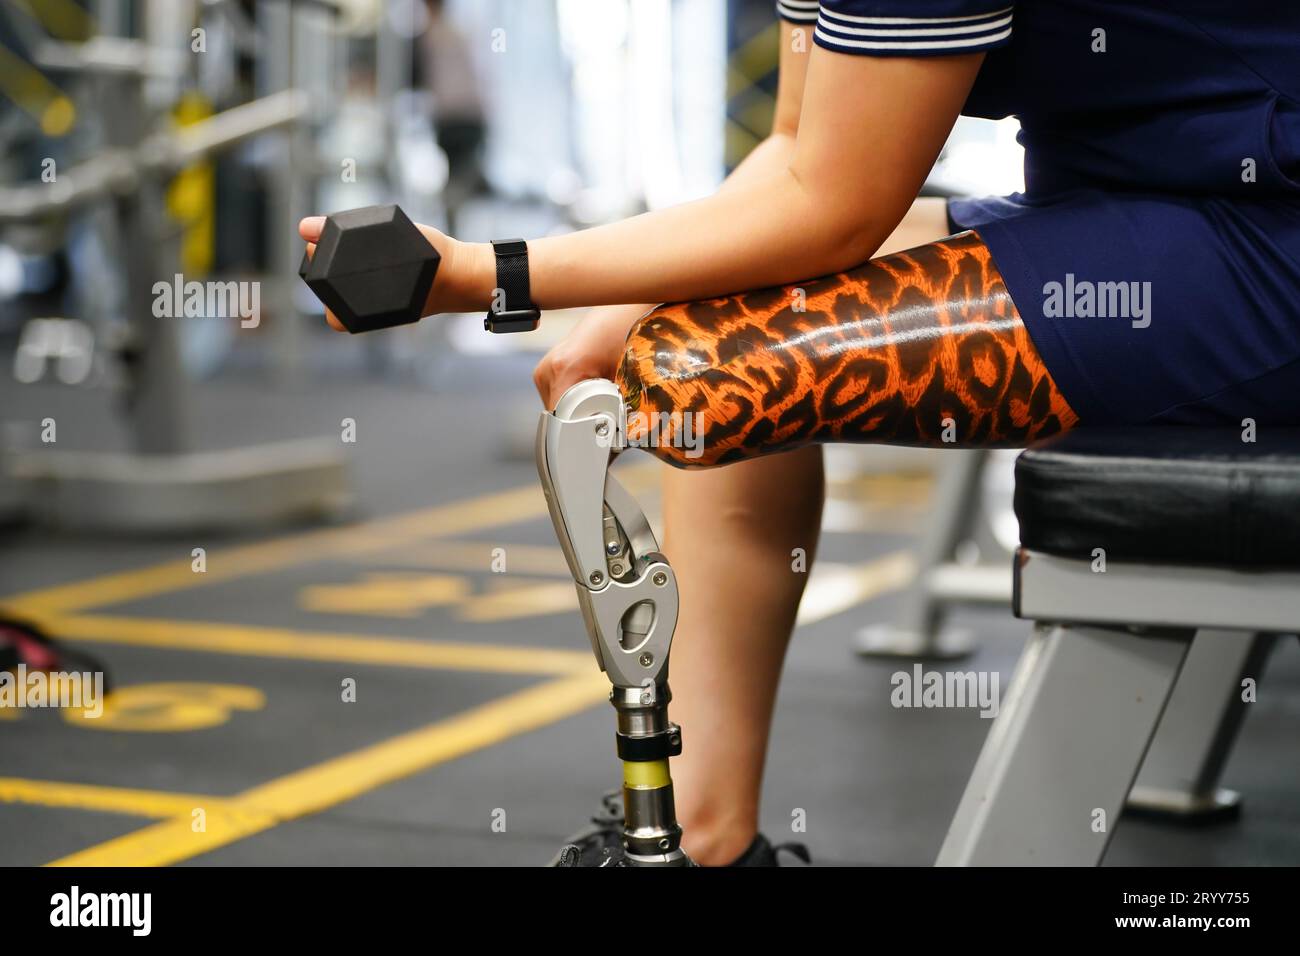 Young female with one prosthetic leg warms up by lifting light weights. Concept of living a woman's life with a prosthetic limb. Stock Photo